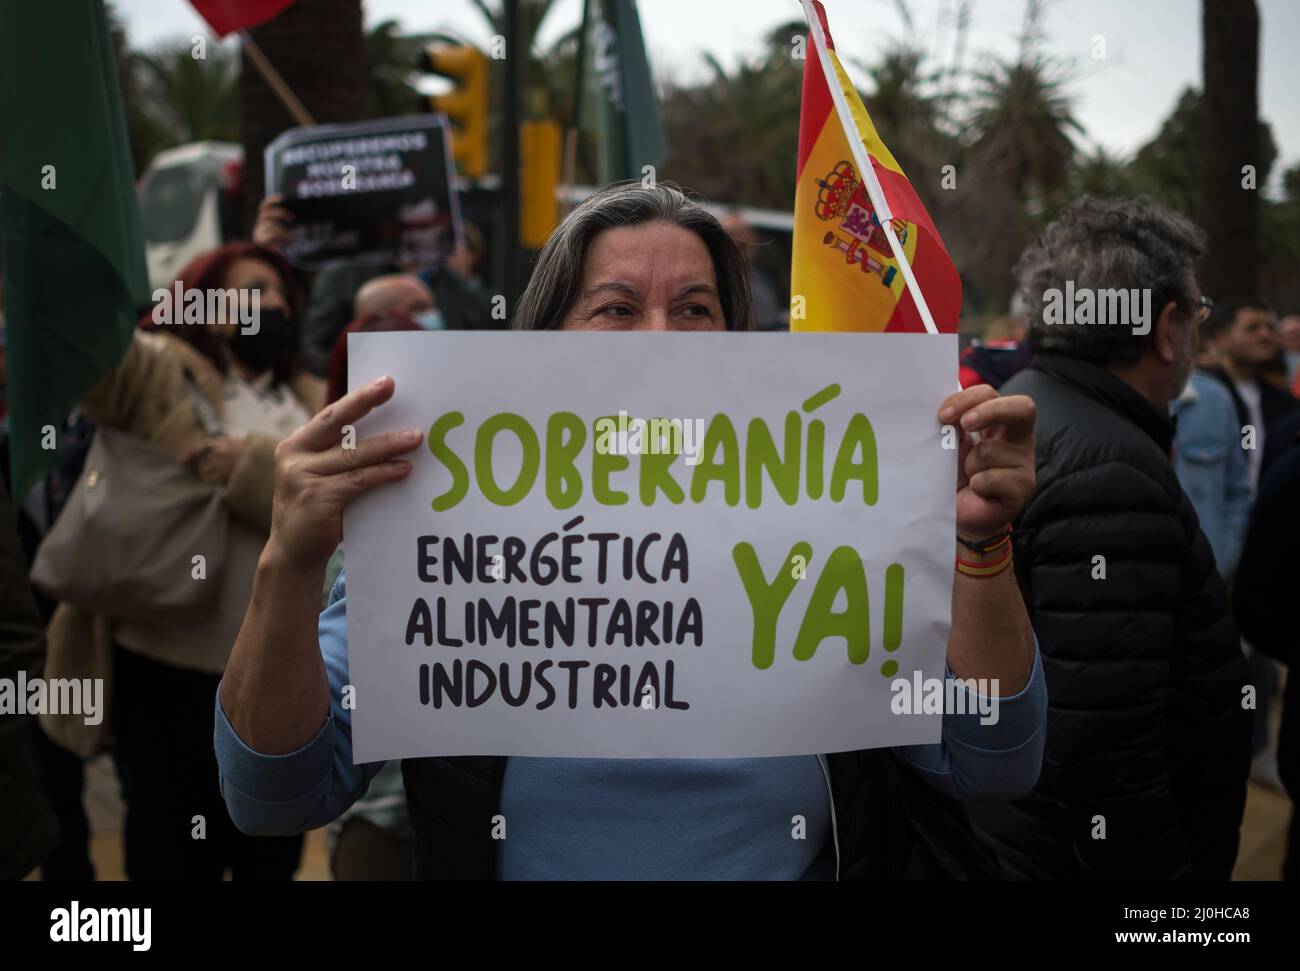 A supporter of far right Vox party is seen holding a placard expressing her opinion, during a protest against rising fuel prices and Spanish government outside Malaga town hall. Spain experiences a general strike of truck drivers due to rise of prices in fuel and costs in other essential sectors causing discomfort between Spaniards and several protests in the country by political party VOX. The Spanish transport sector continues for sixth consecutive days in strike causing a shortage in some essential products in supermarkets. Stock Photo